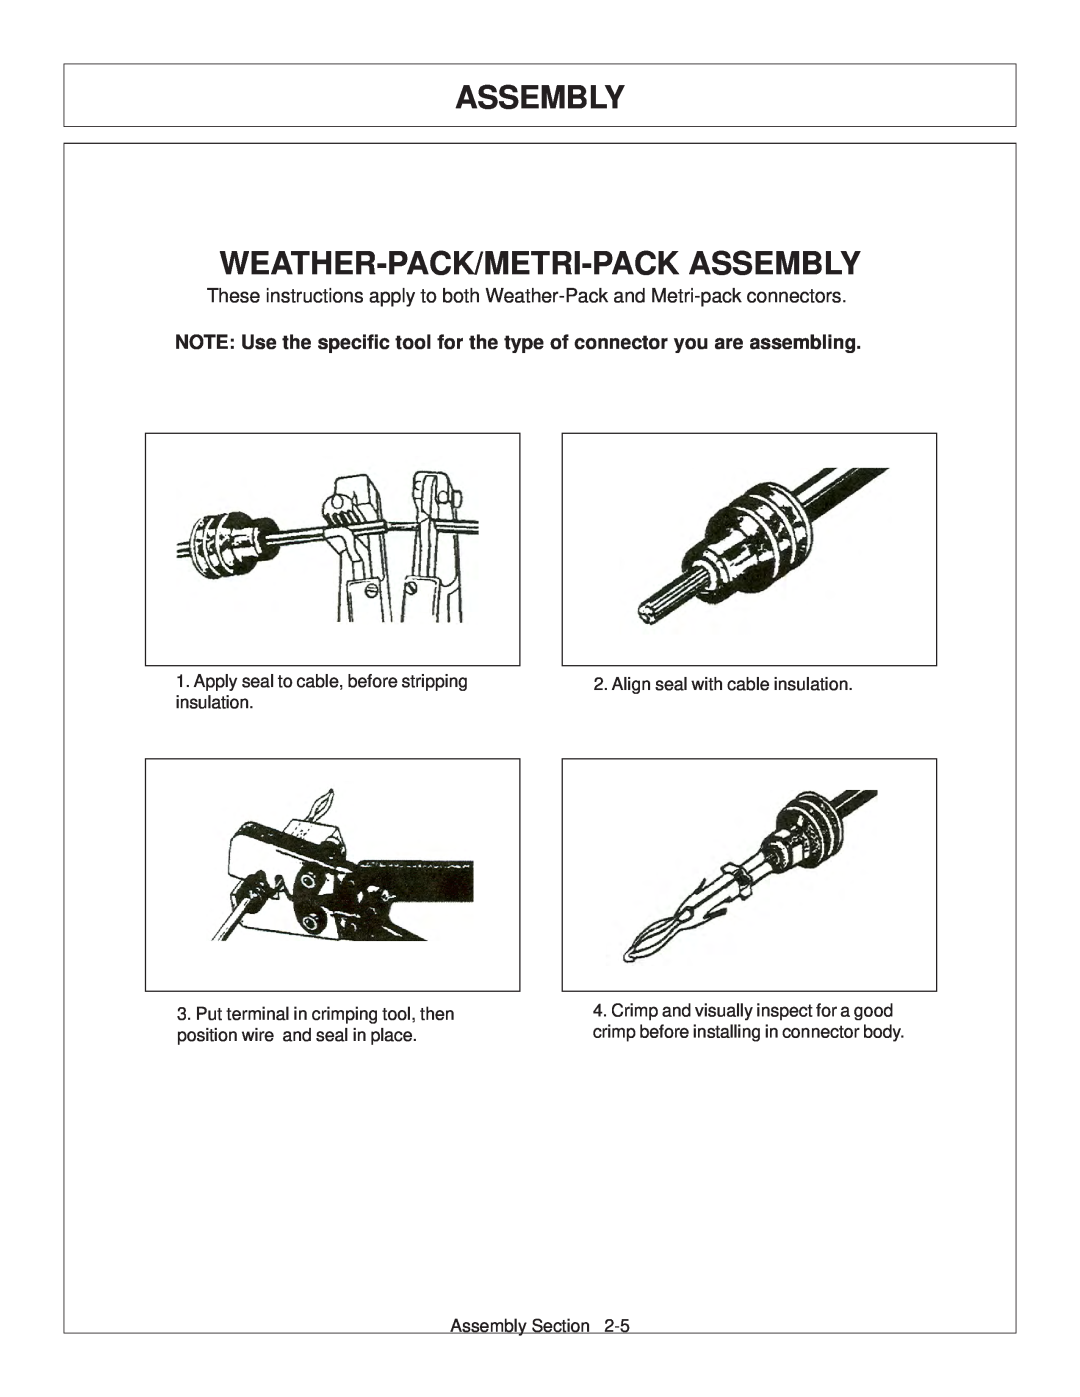 Tiger Products Co., Ltd TS 100A manual Weather-Pack/Metri-Pack Assembly 